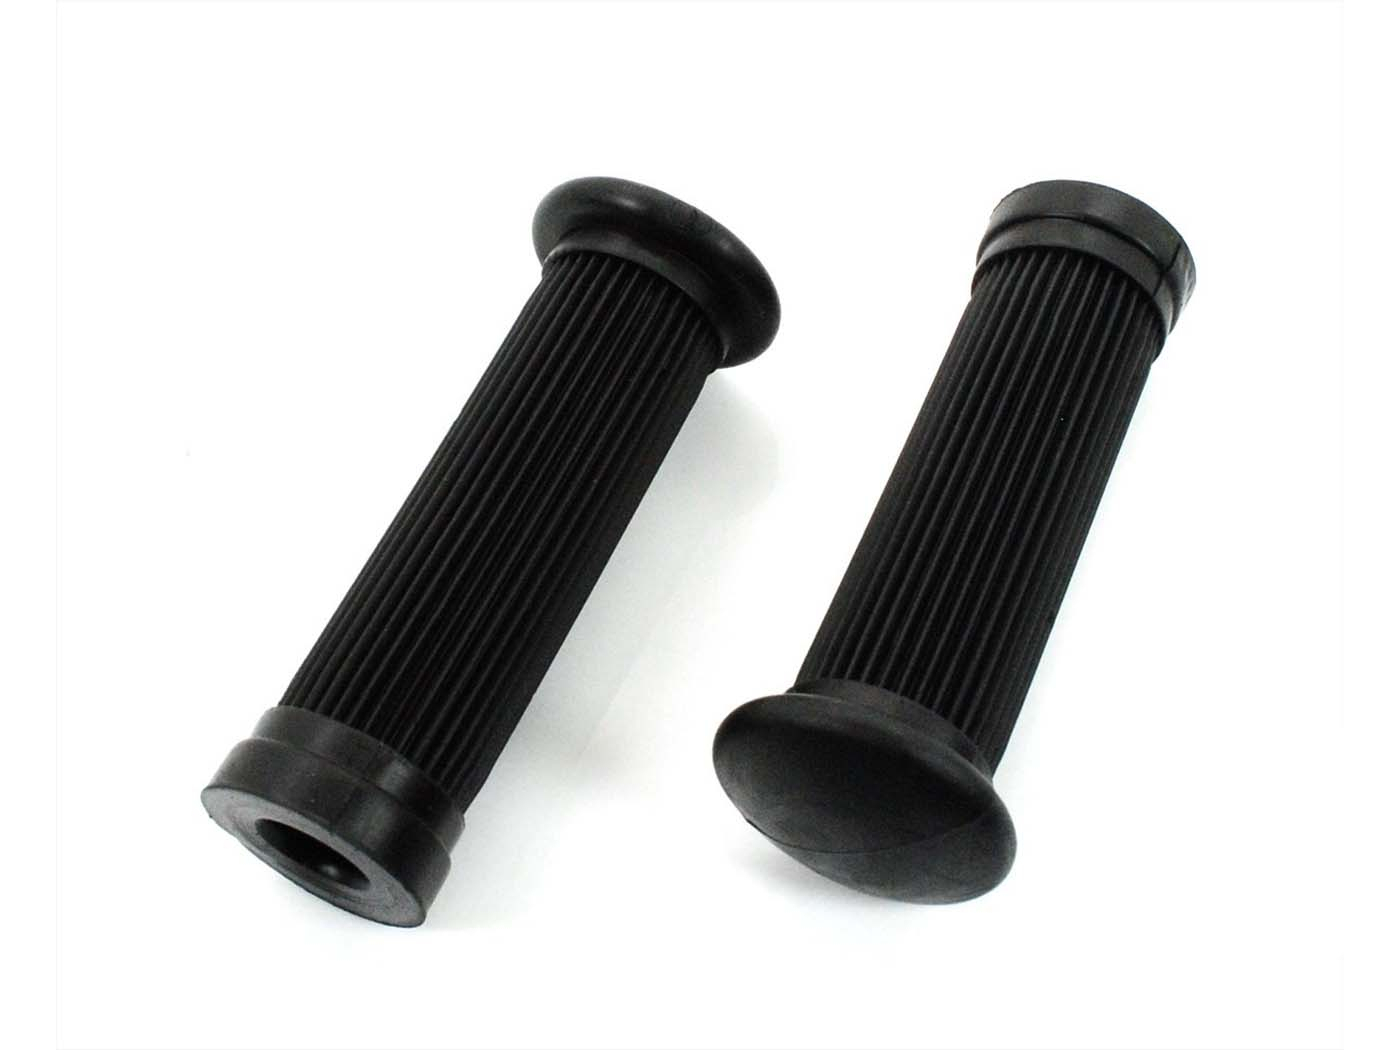 Footrest Rubbers Comfort 104mm Long 27mm Diameter Inside Approx. 14mm For Hercules, DKW, Miele, Rixe, Sachs